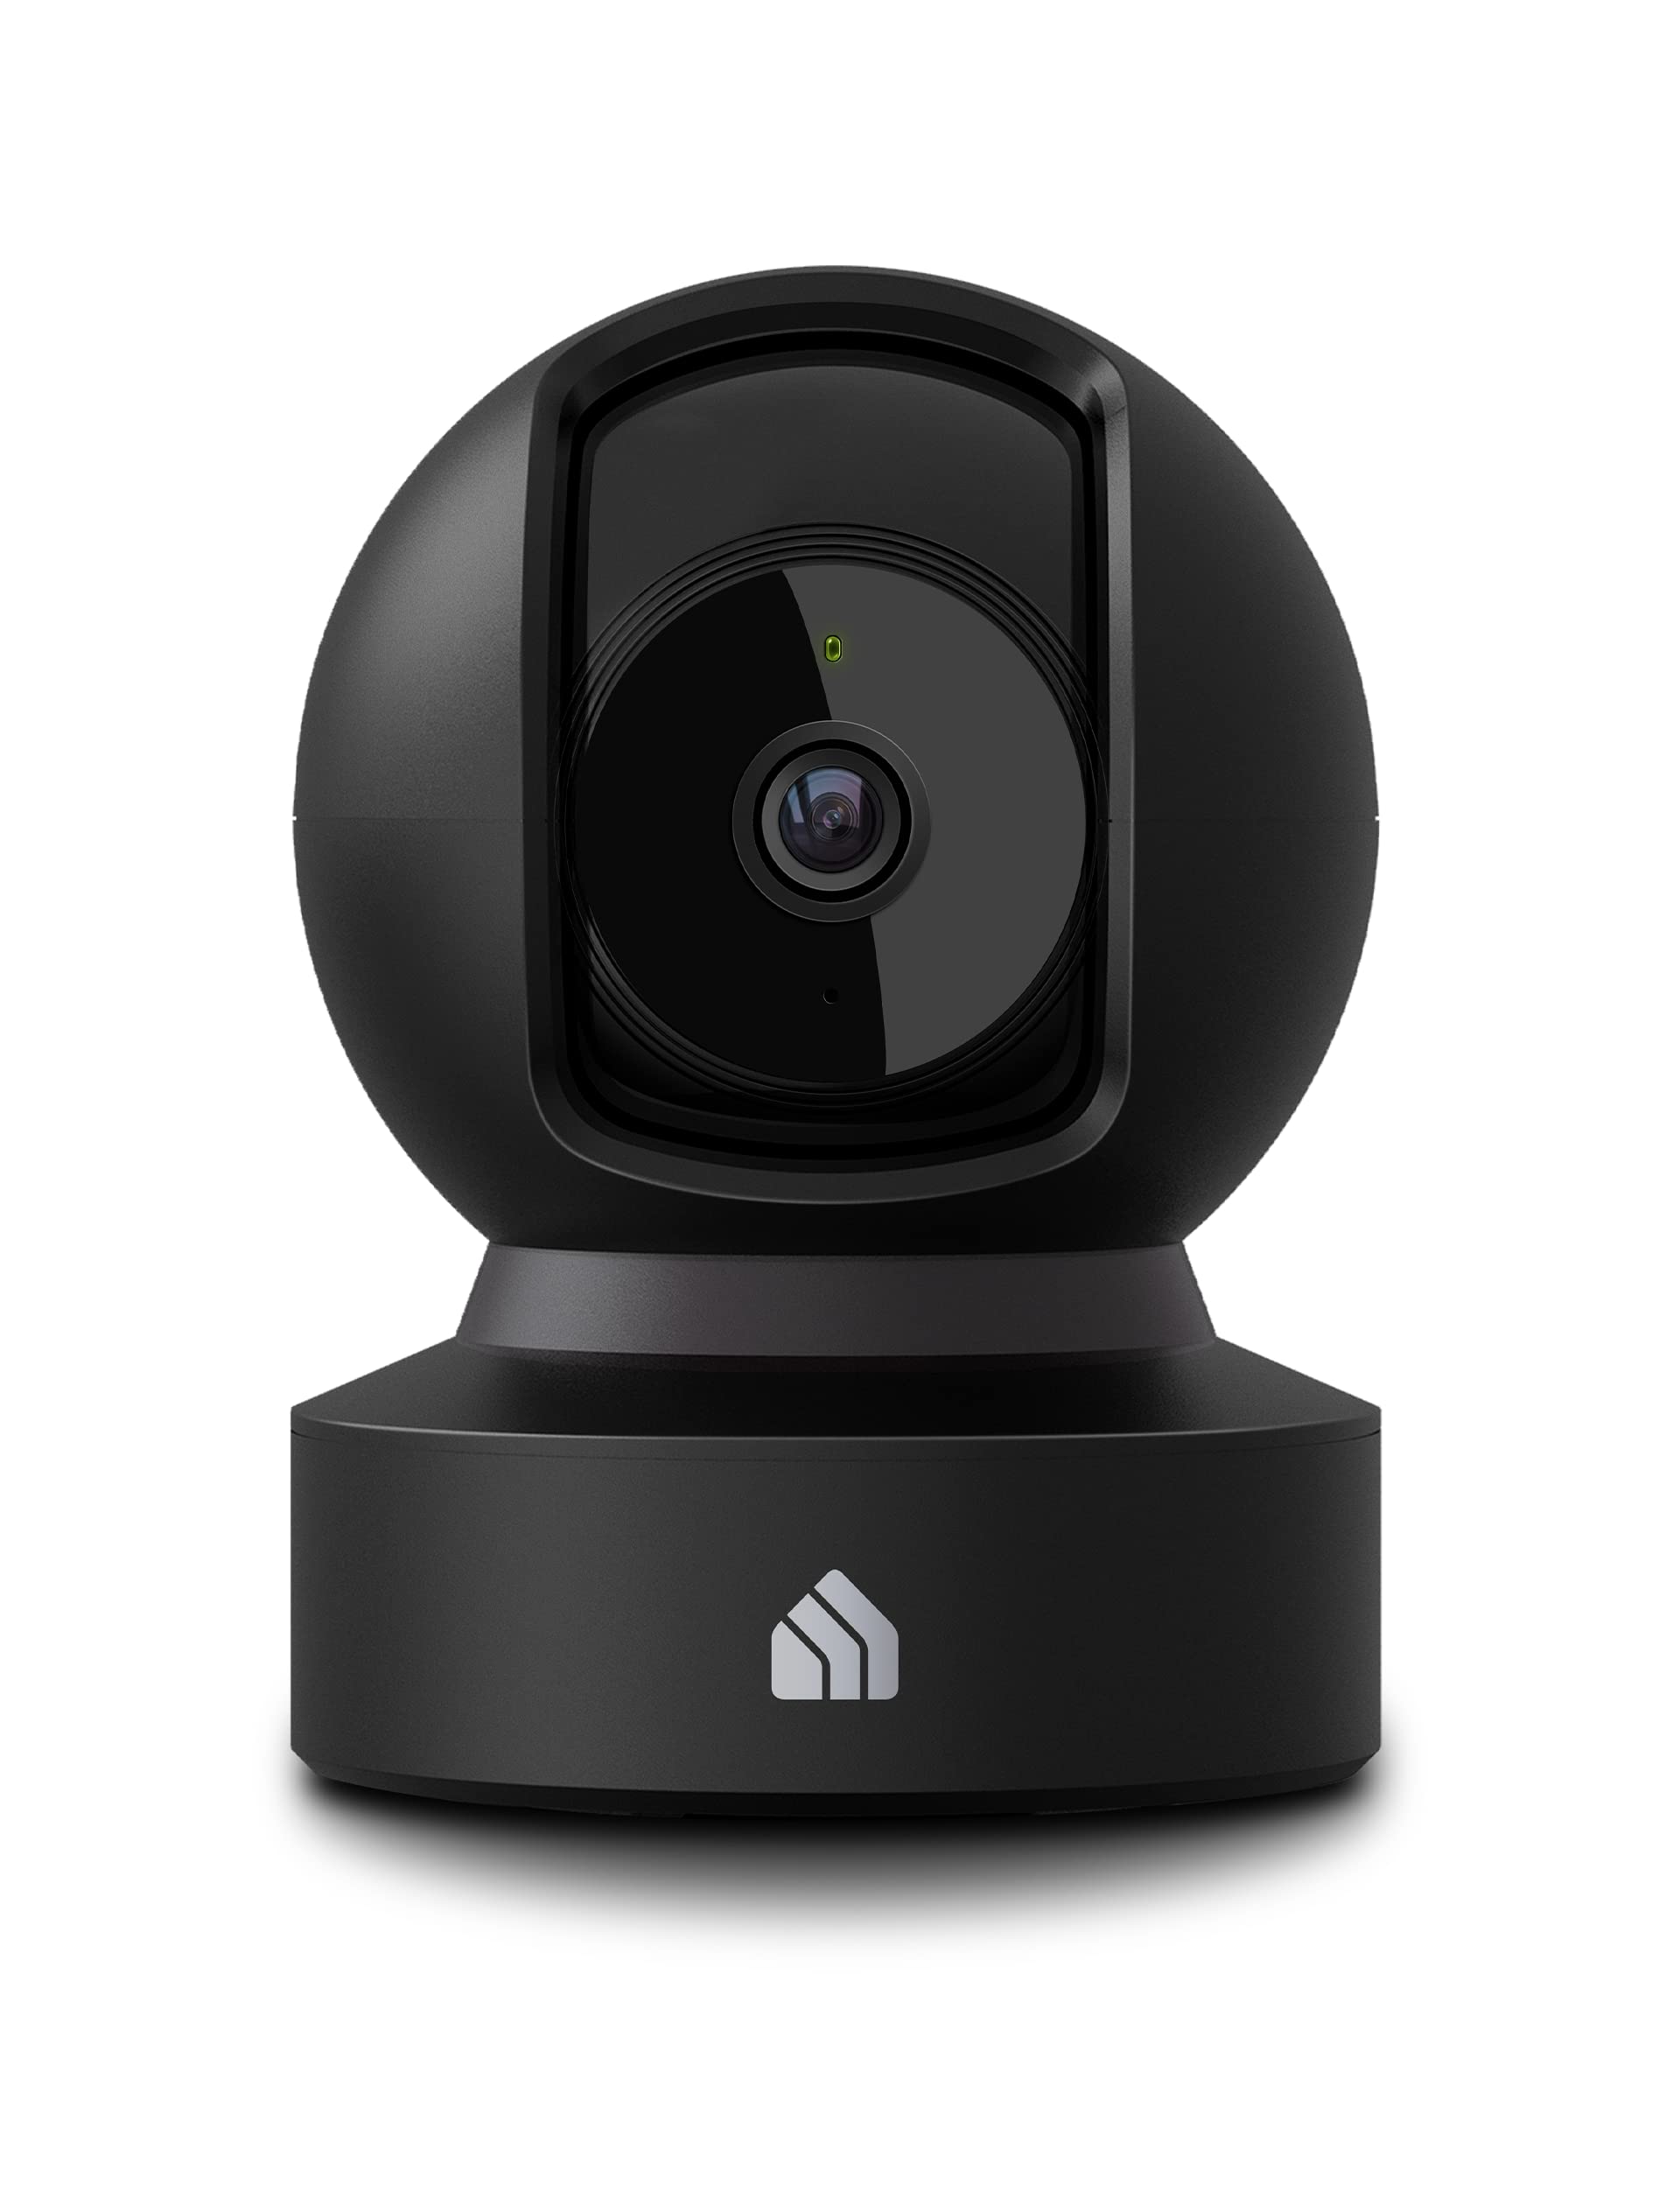 TP-Link Kasa Smart Security 1080p HD Indoor Pan-Tilt Camera $24.99 or 2 for $45.98 ($22.99 each), More + Free Shipping w/ Prime or $25+